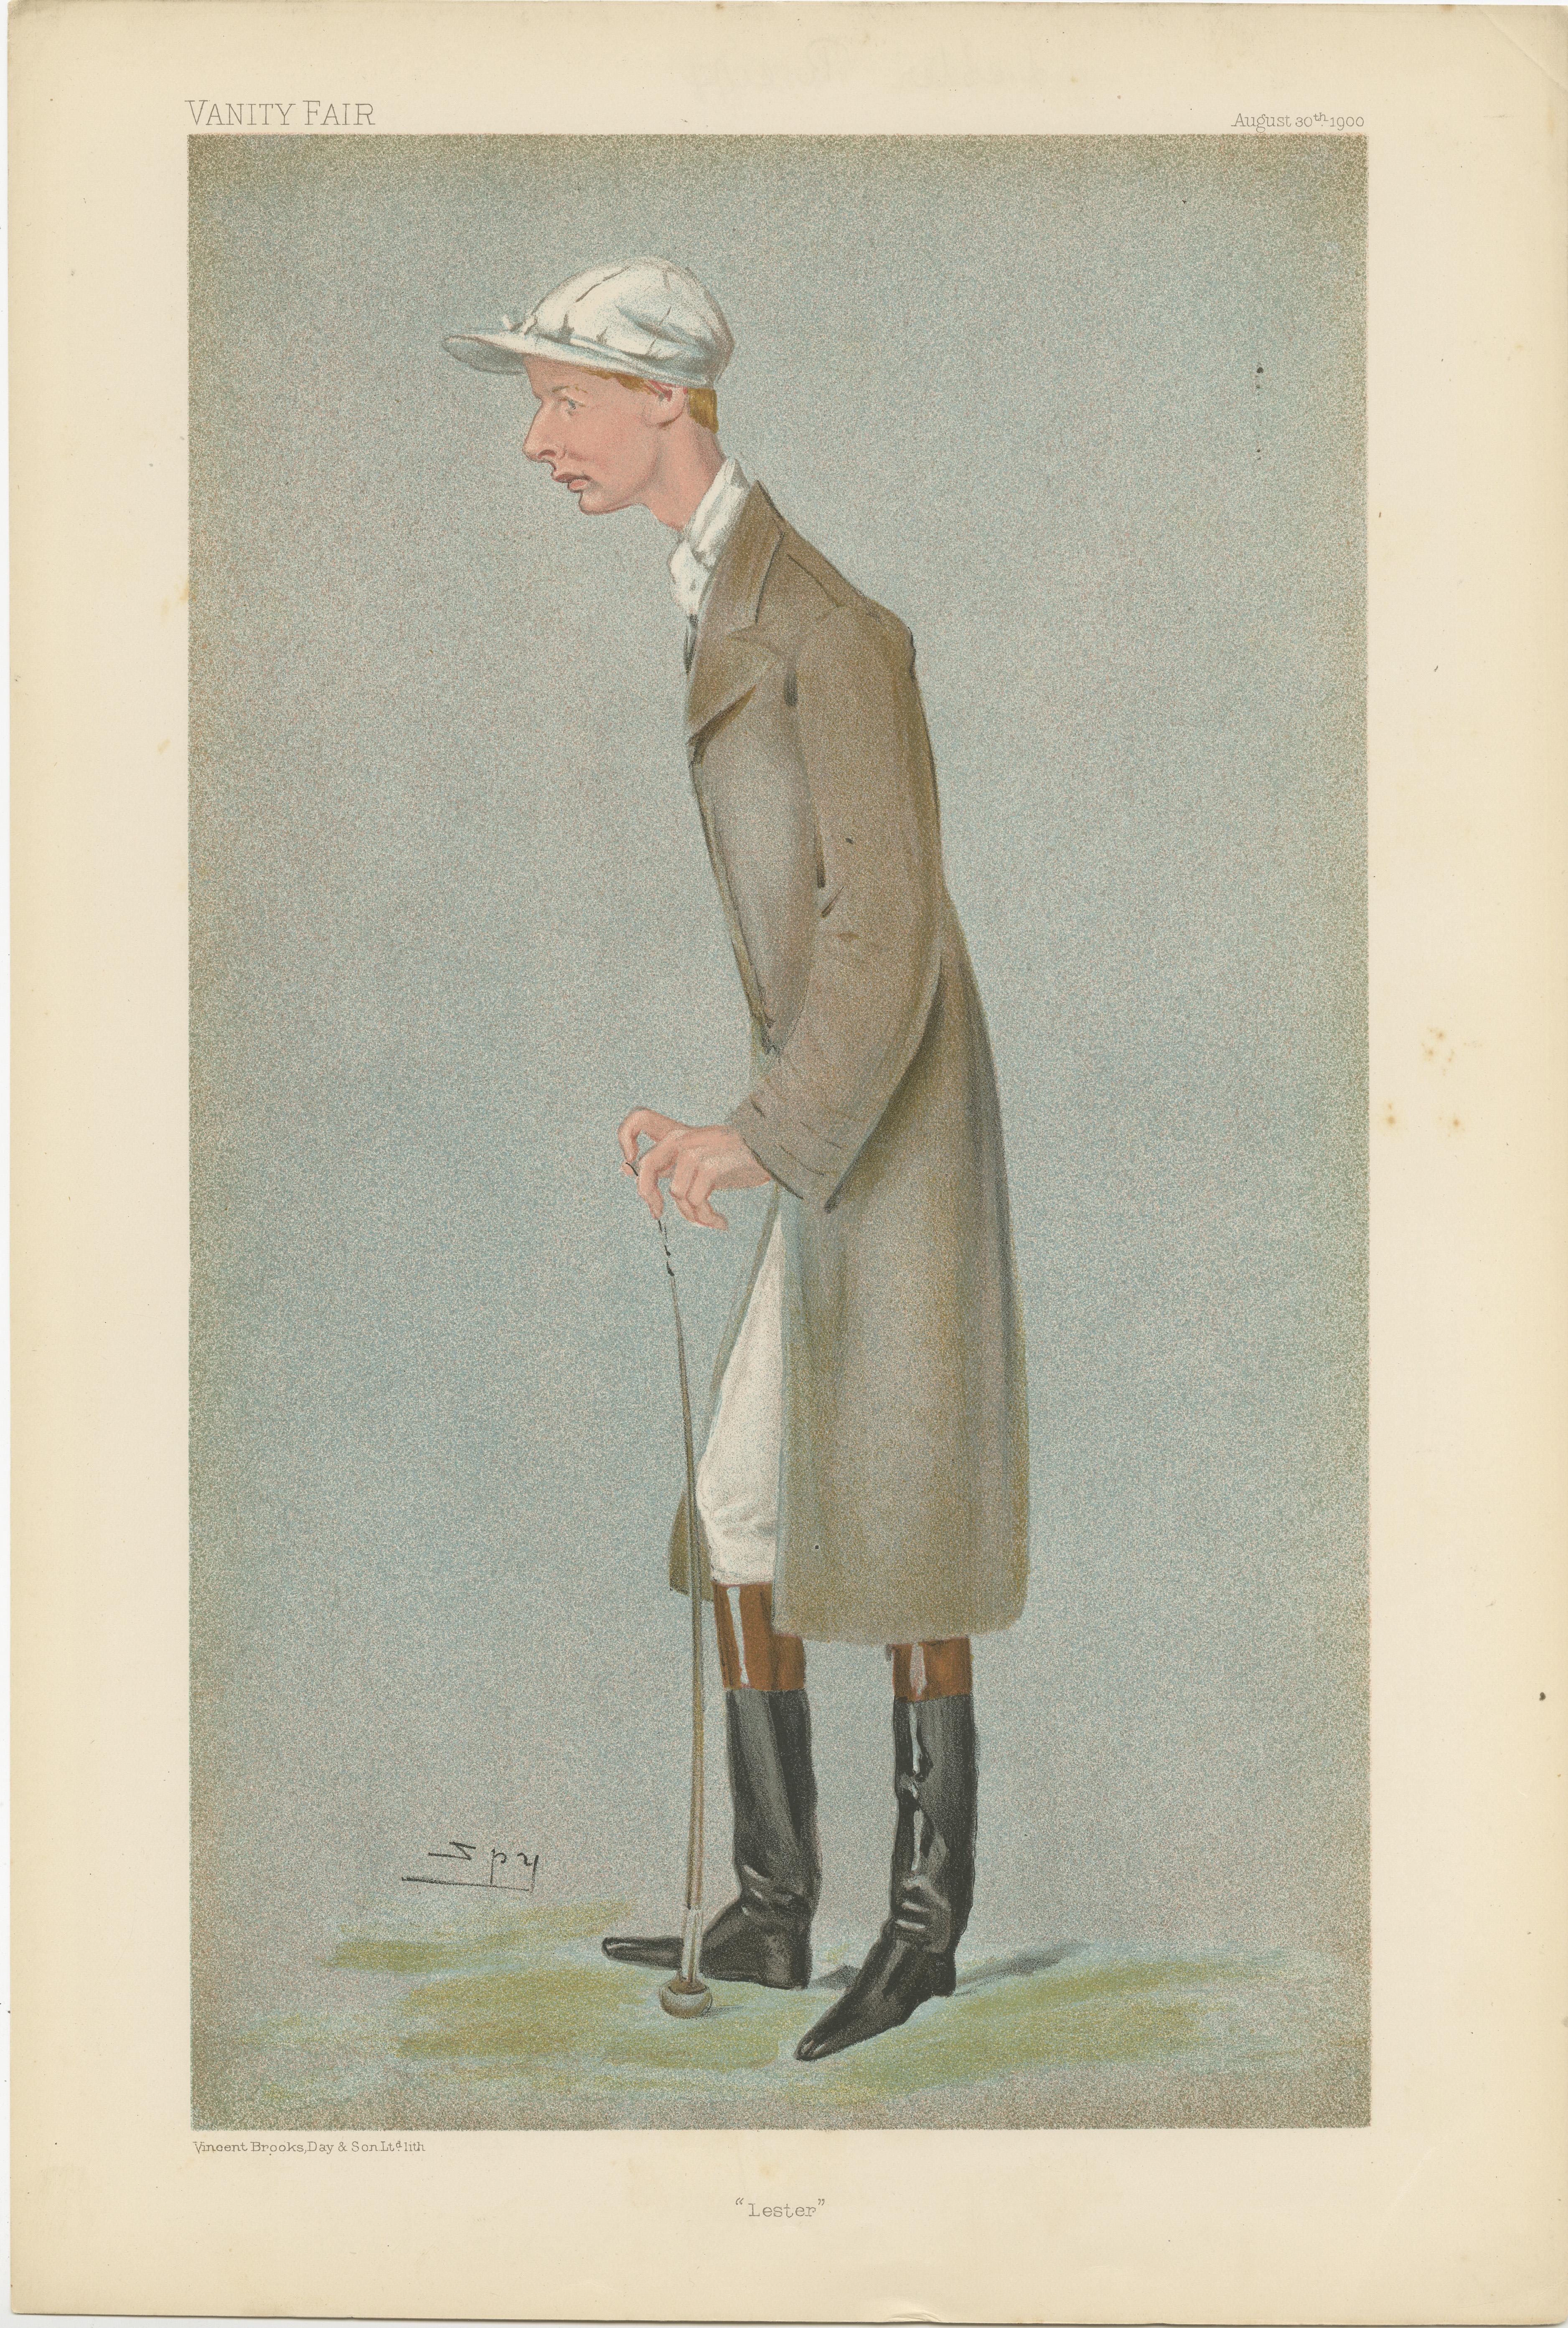 Chromolithograph titled 'Lester'. Lester Berchart Reiff (1877–1948) was an American jockey who achieved racing acclaim in the United Kingdom in the first decade of the twentieth century. In 1900, he was the number one jockey racing in Britain based